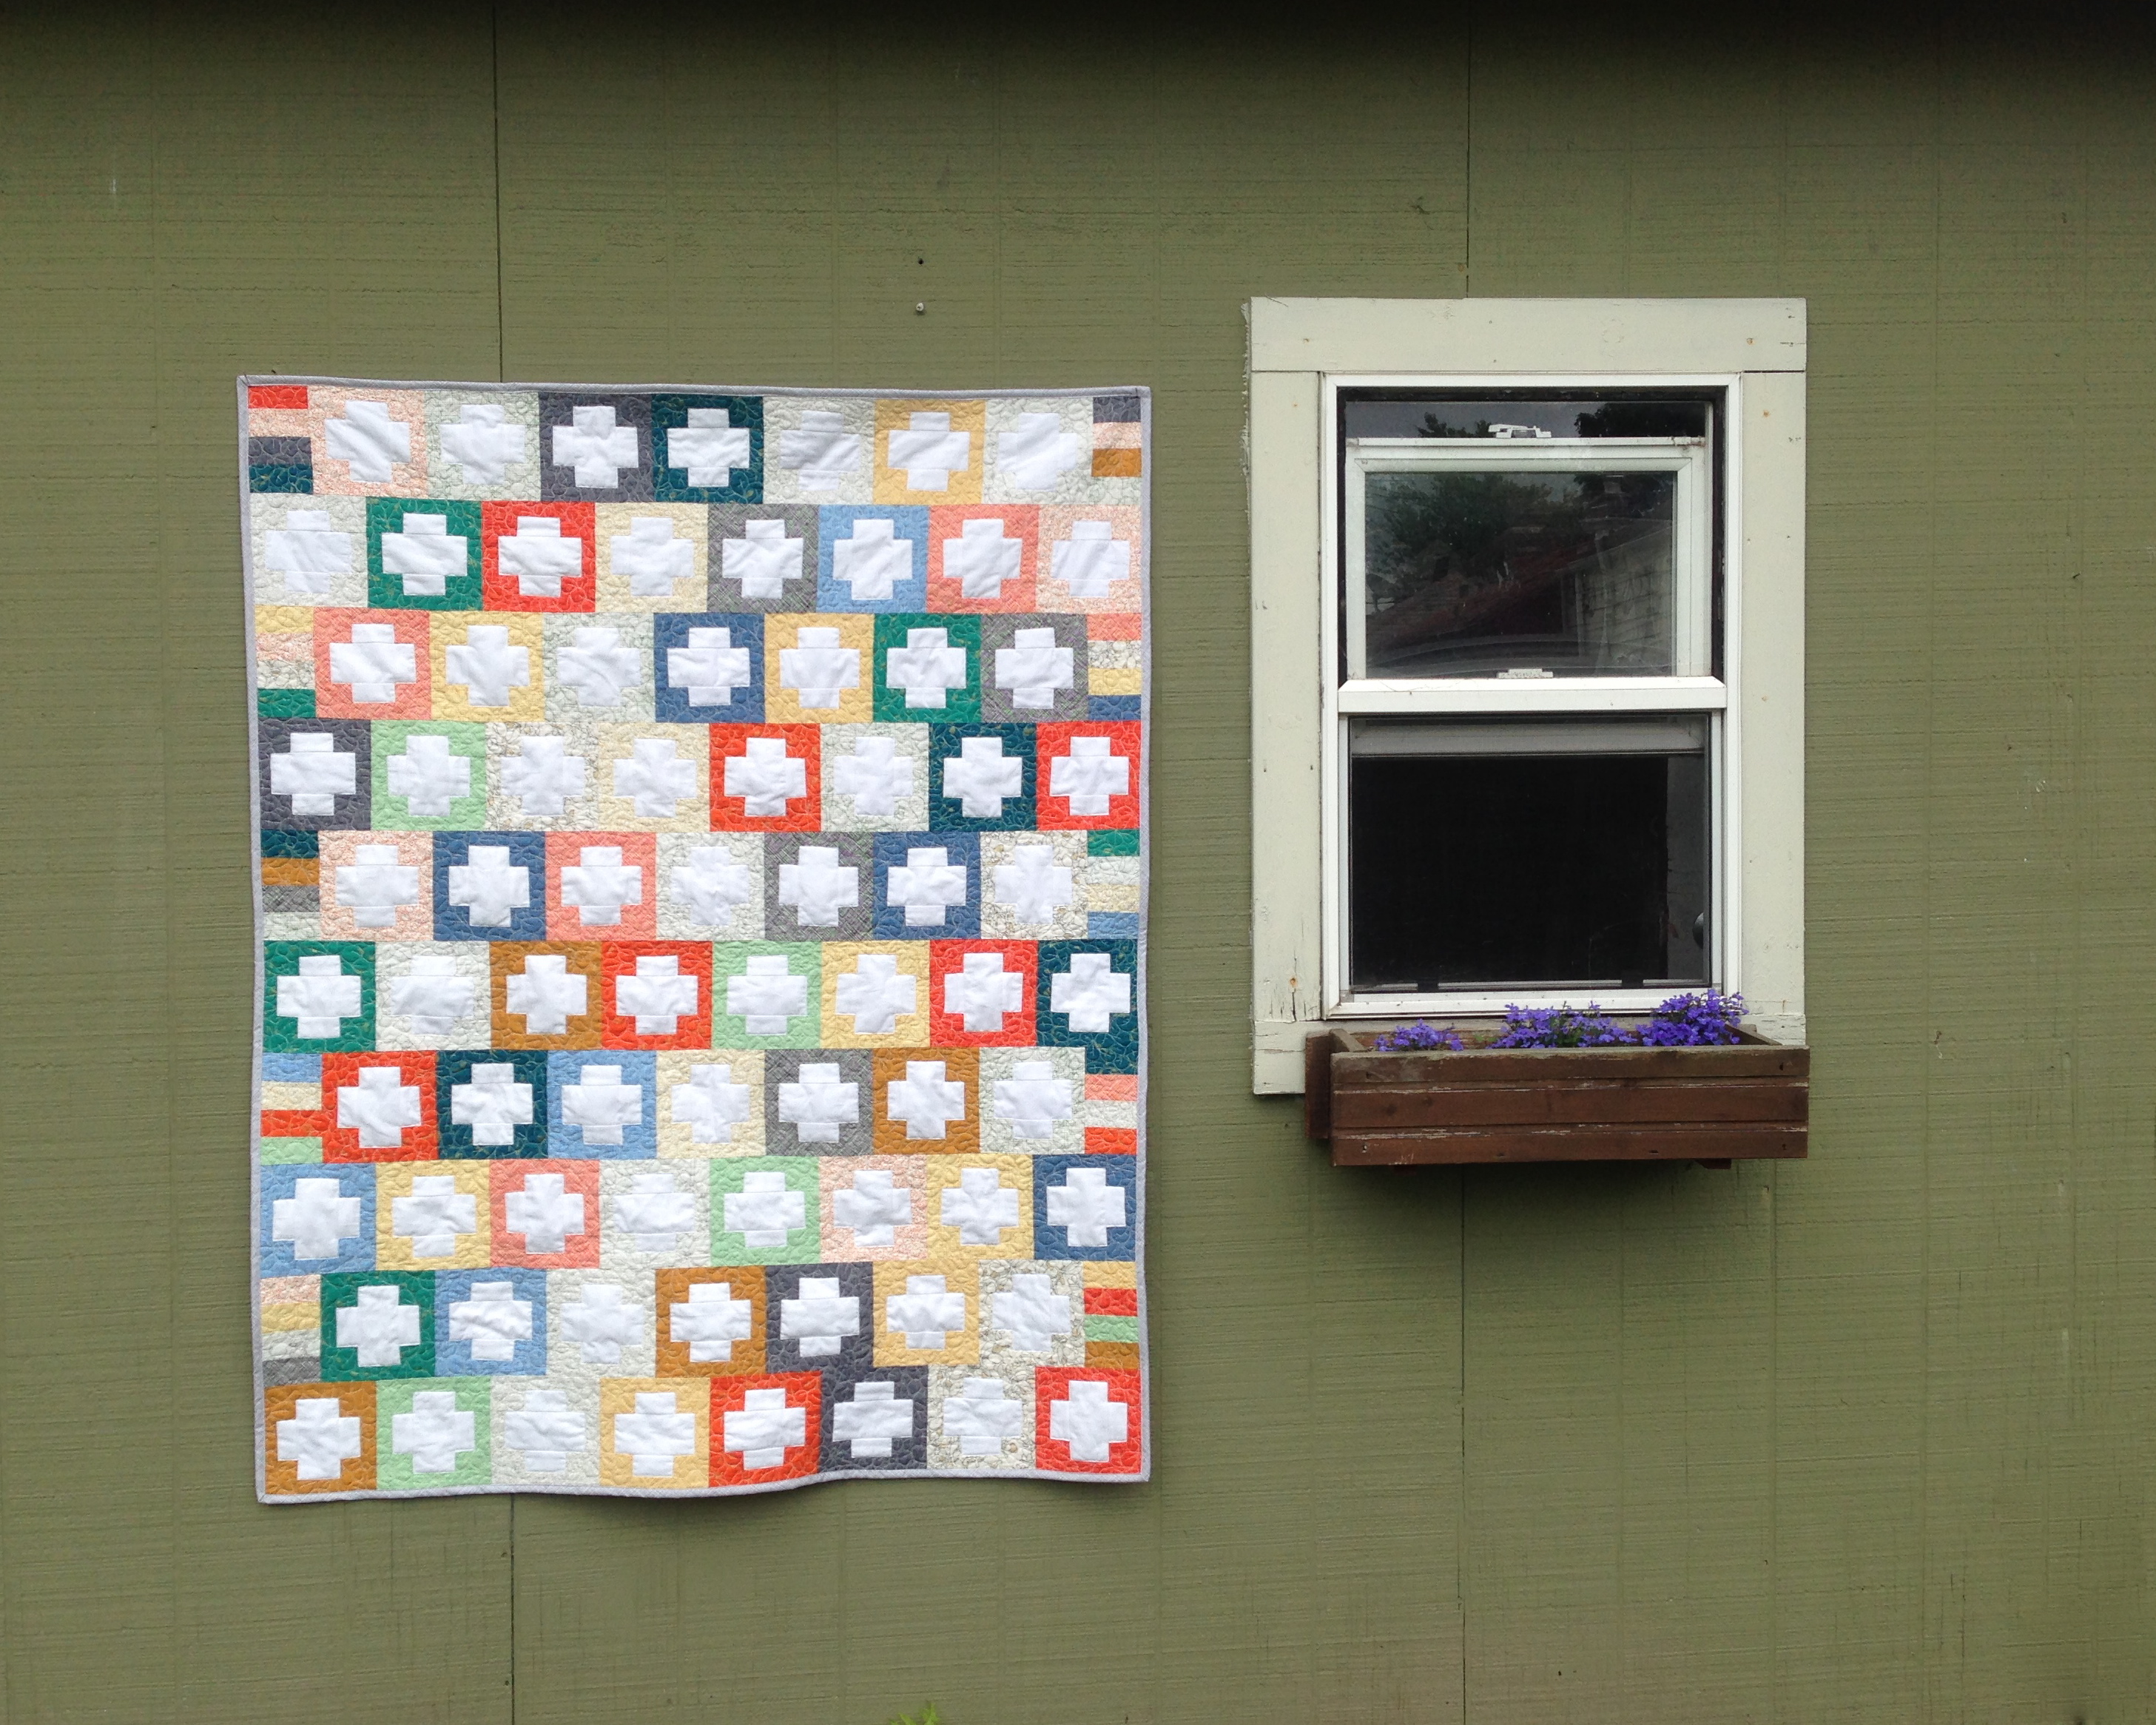 July’s Quilt of the Month, Cluck Cluck Sew’s “Inside out” In
Botanics.